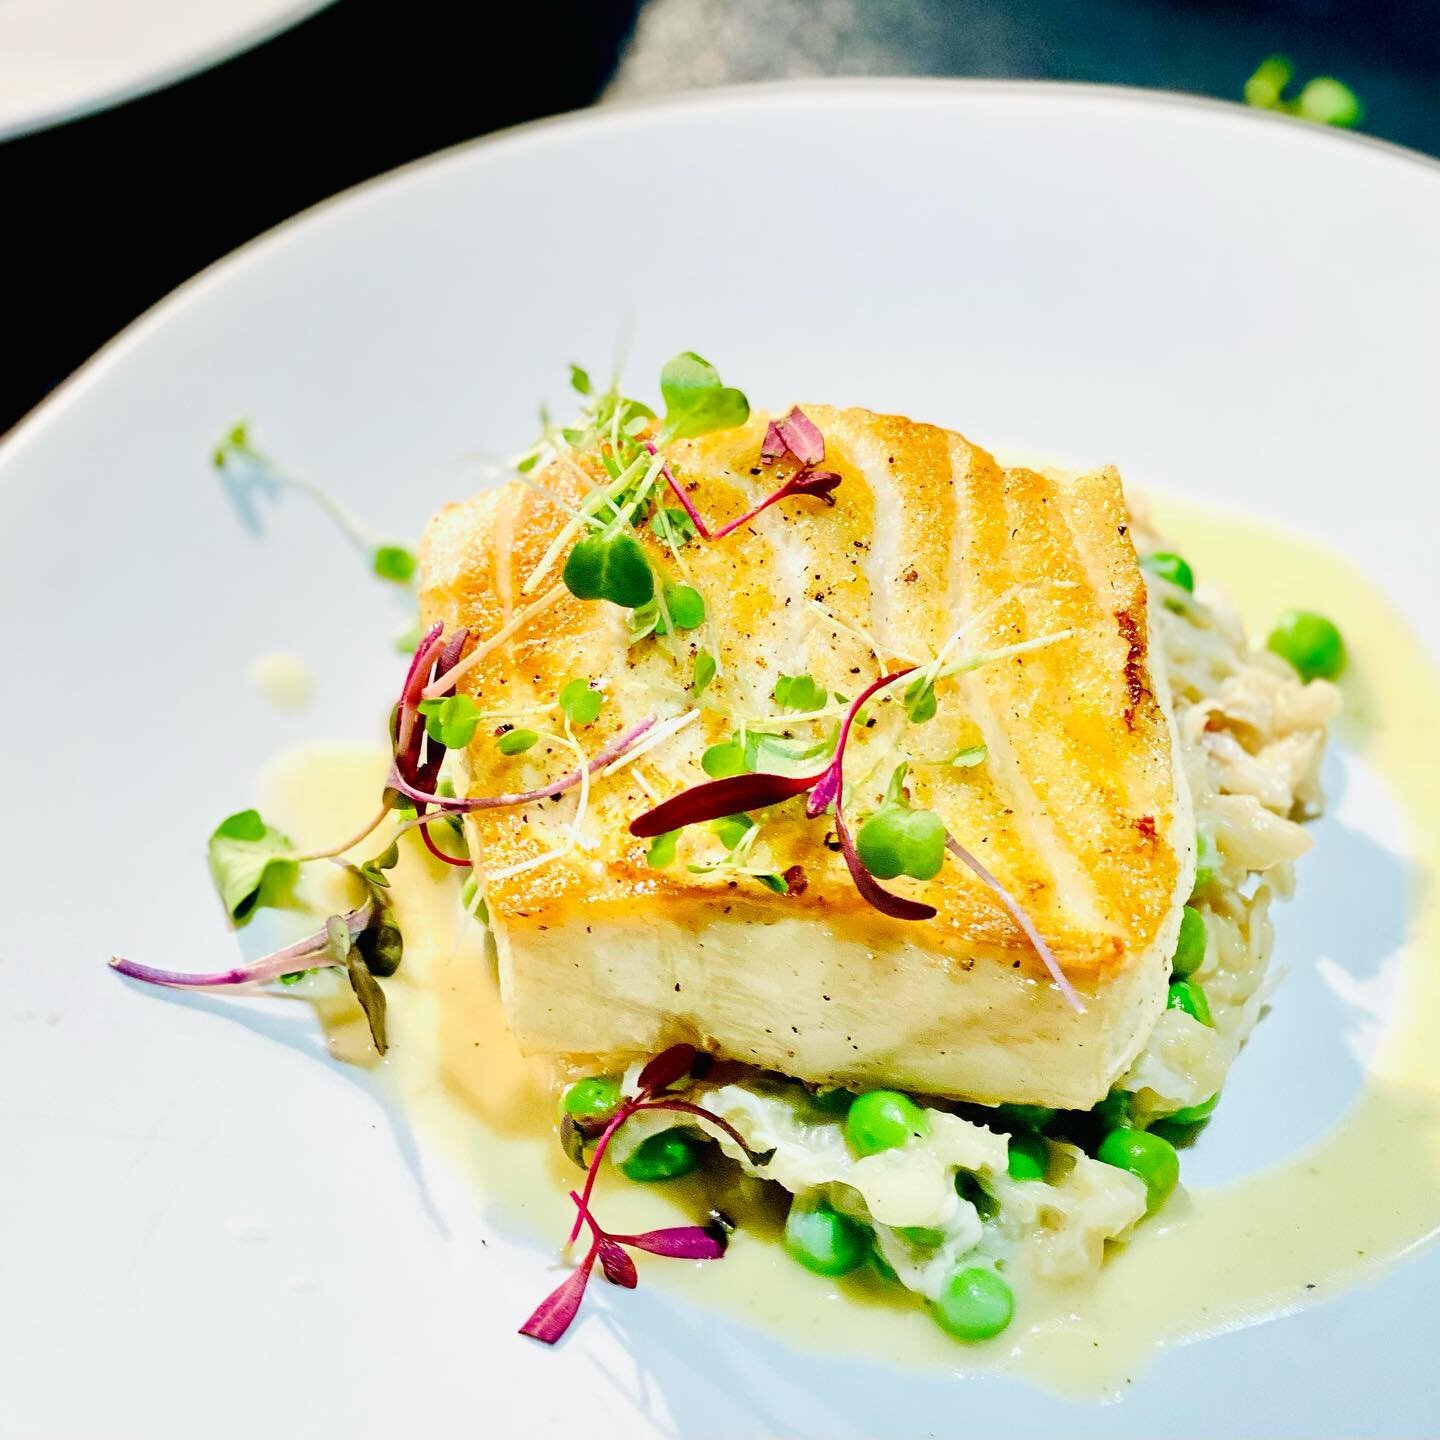 Looking back on some of our favorite dishes we prepared this year, this Seared Sea Bass with Dungeness crab and English pea risotto topped with a Meyer lemon nage is easily in our Top Ten! ✨🔝🔟

#topten #dishes #seabass #seafood #weddings #chasecent